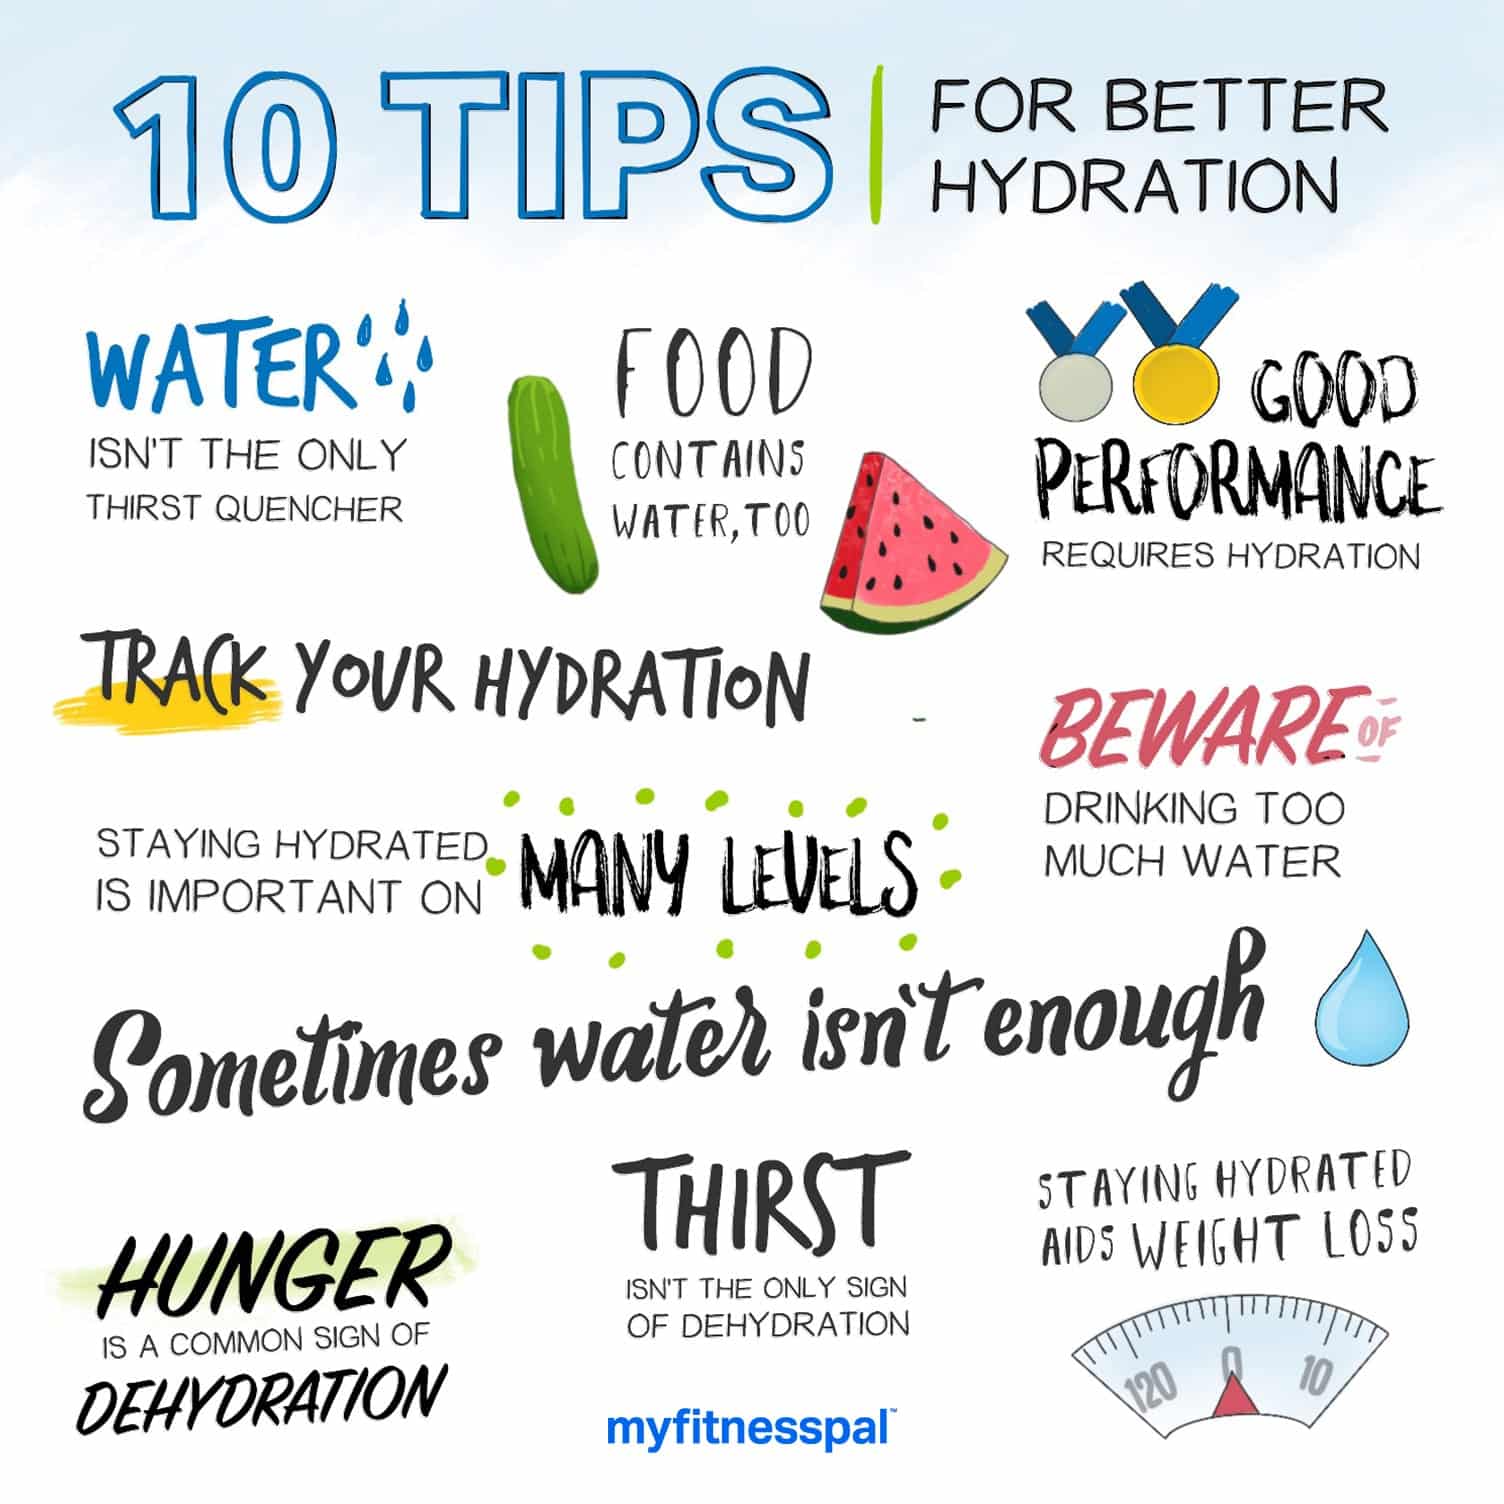 Hydrate and perform at your best consistently